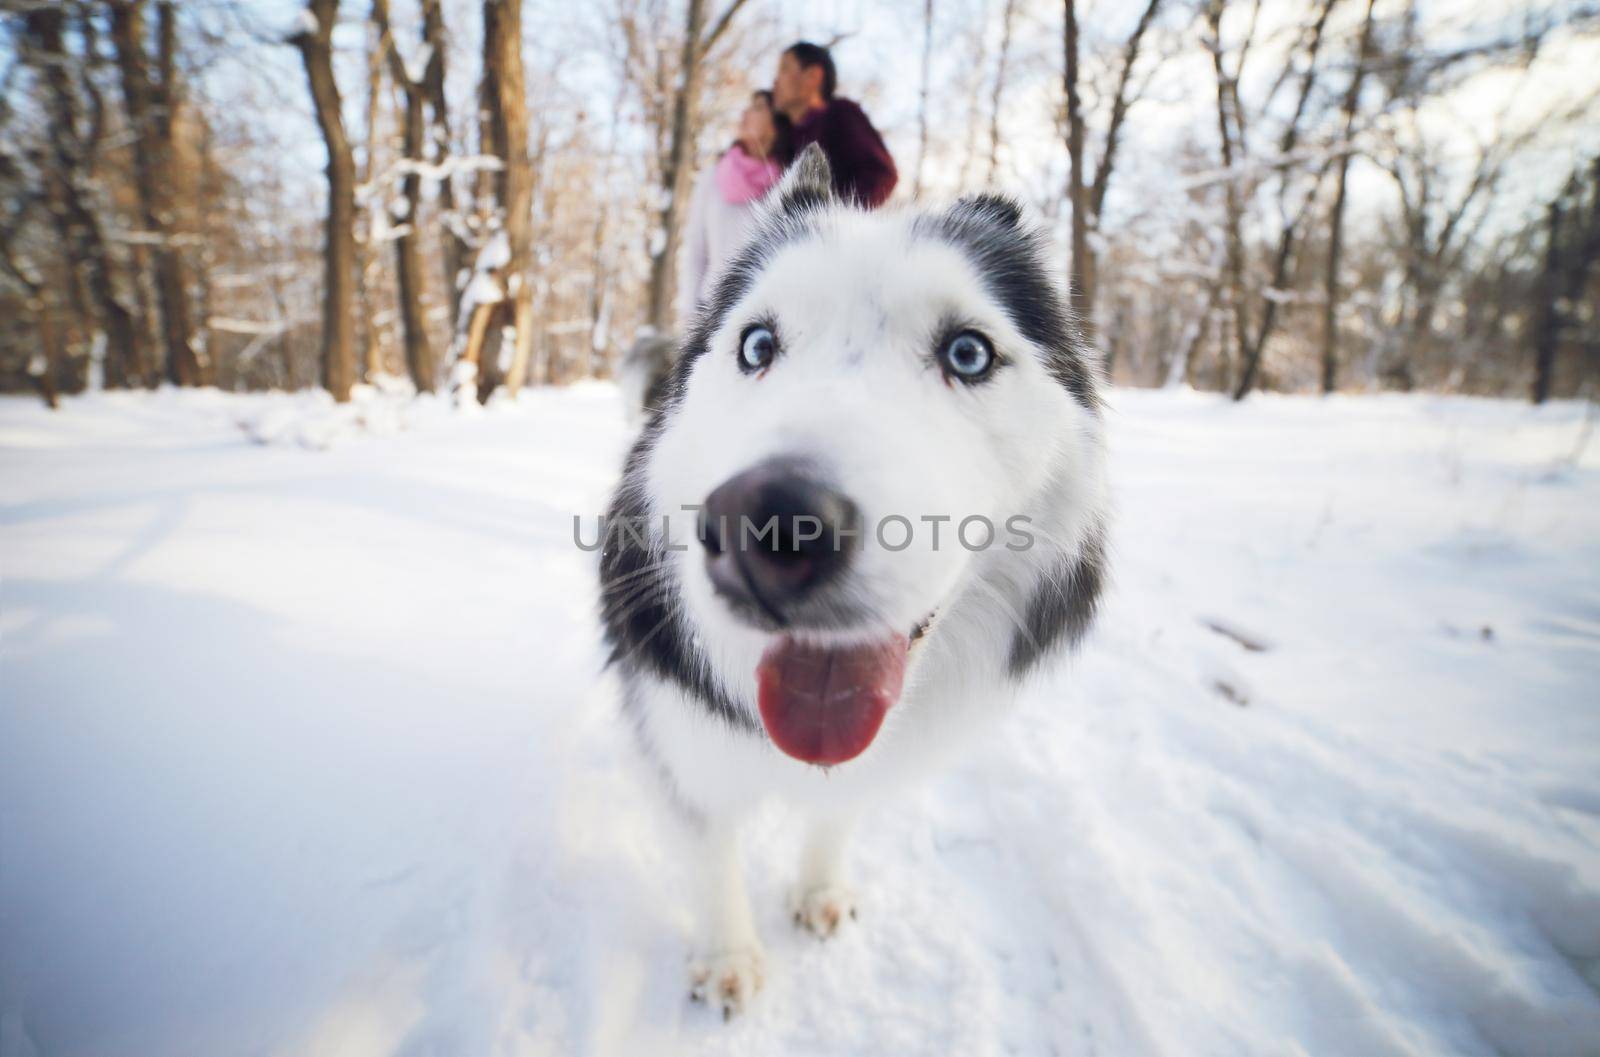 Cheerful muzzle of a dog husky in a winter park, in the background a young couple by selinsmo